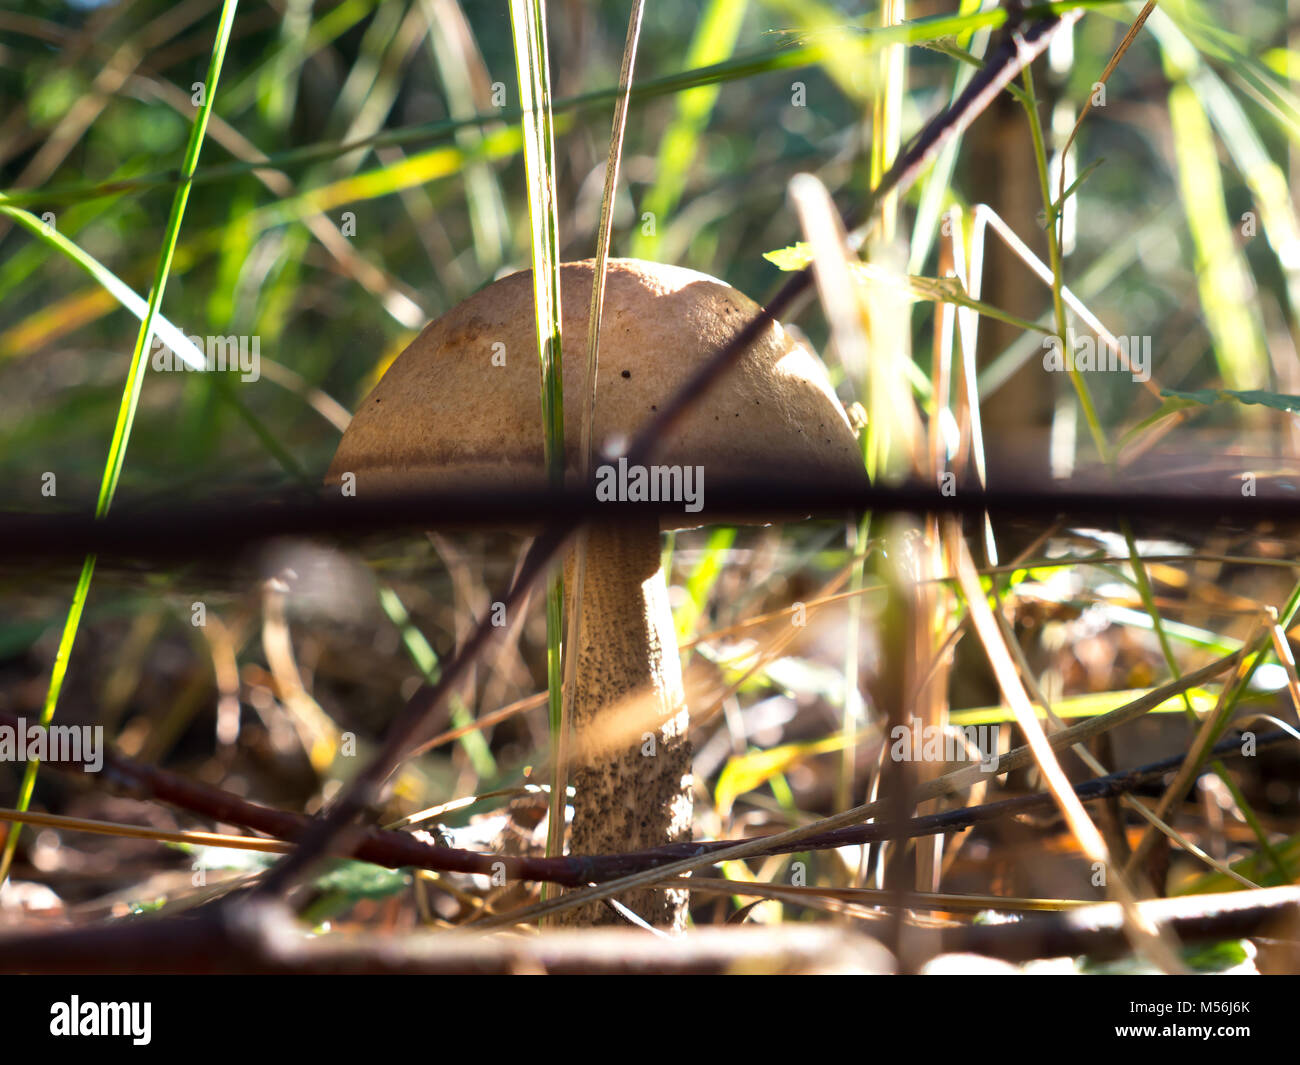 The nature vegetable mushroom on a forest background. Stock Photo